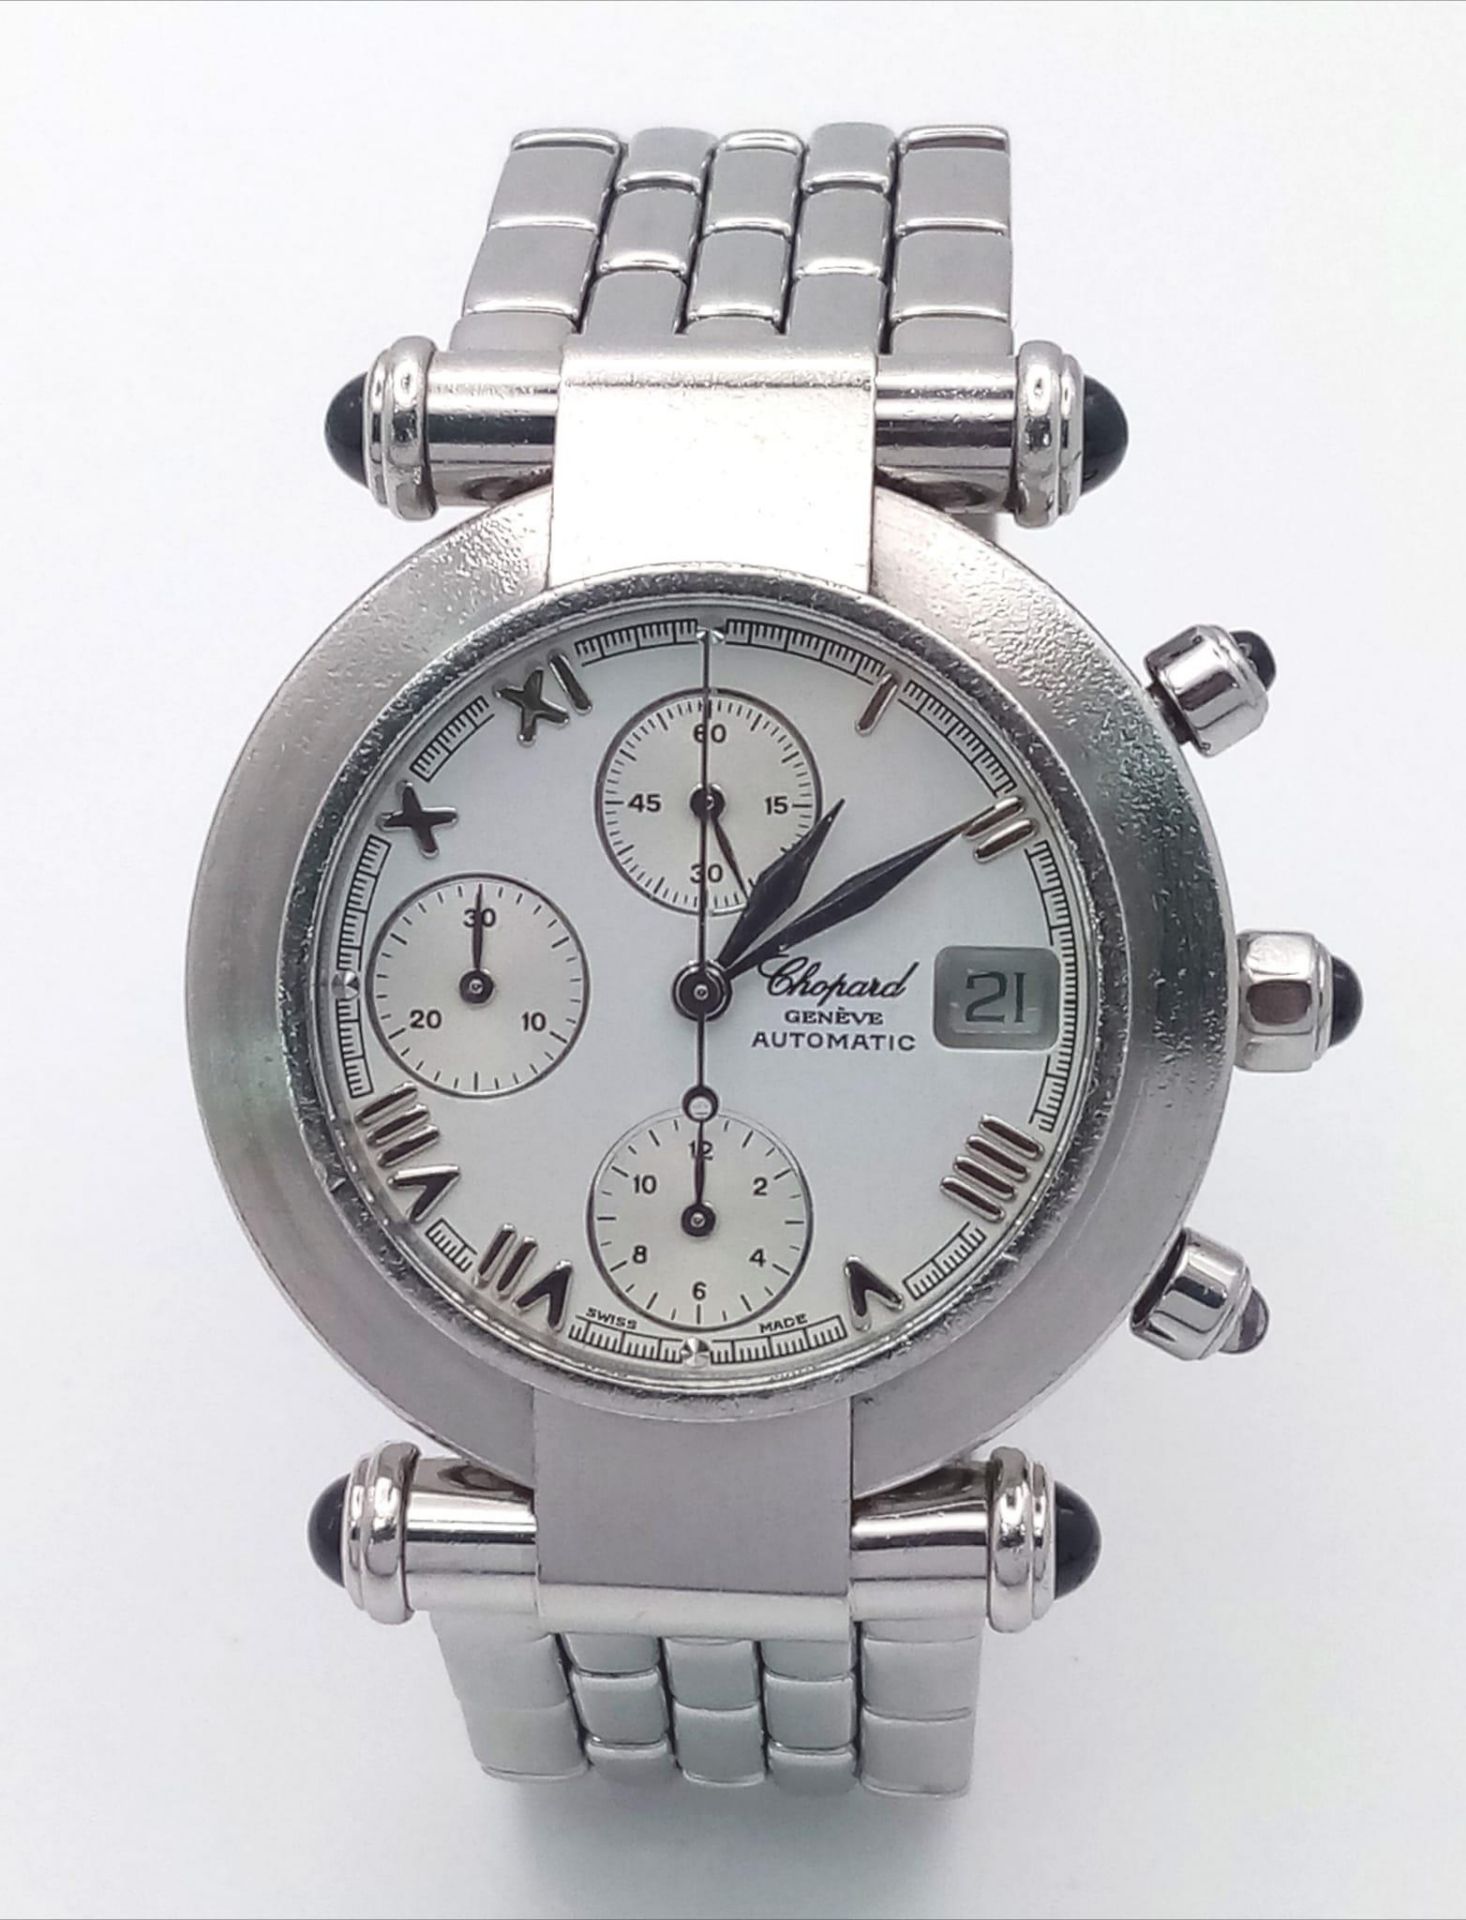 A Chopard Automatic Chronograph Gents Watch. Stainless steel bracelet and case - 37mm. White dial